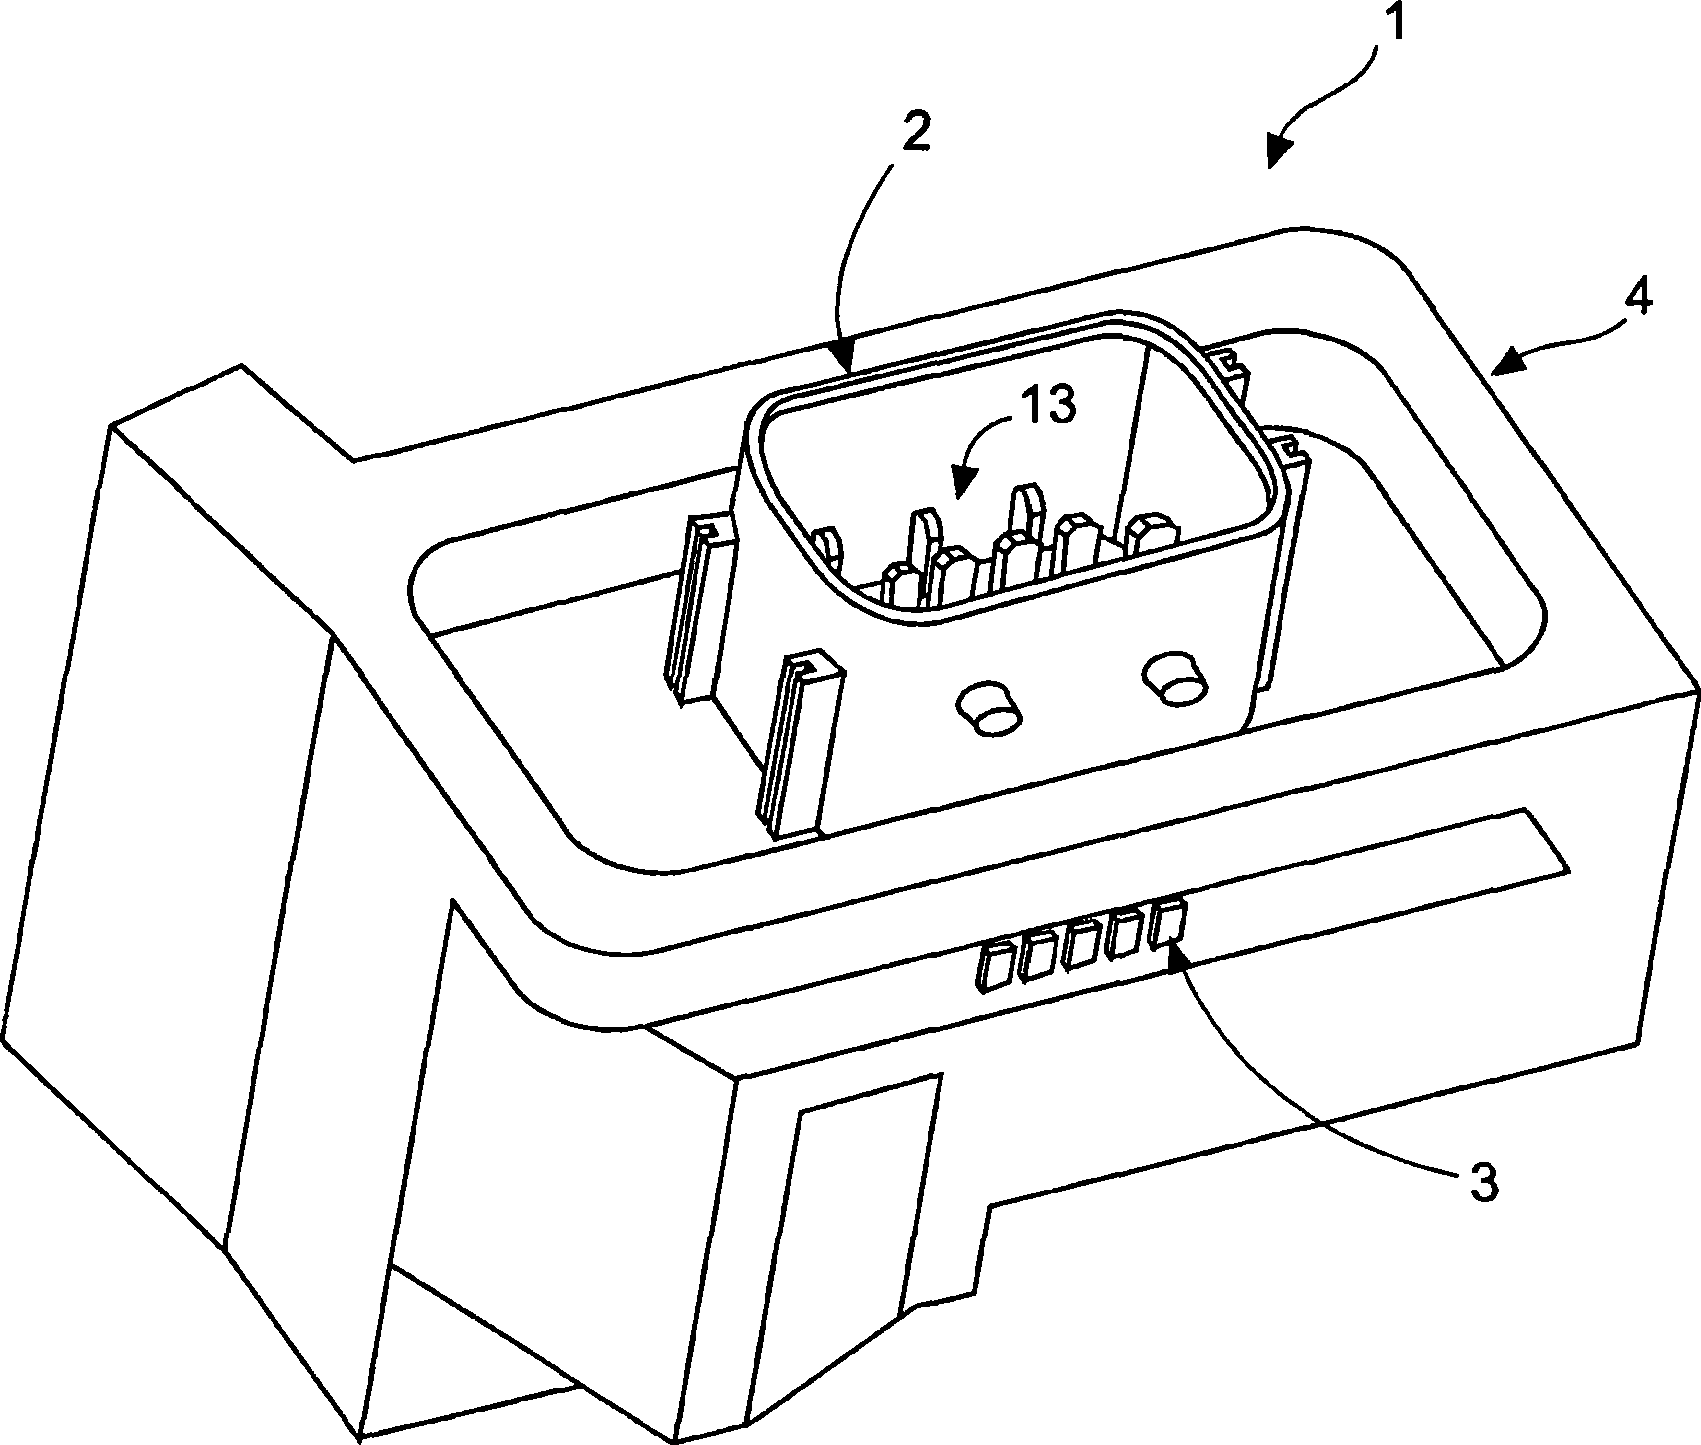 Apparatus for sensing gearbox shifting positions